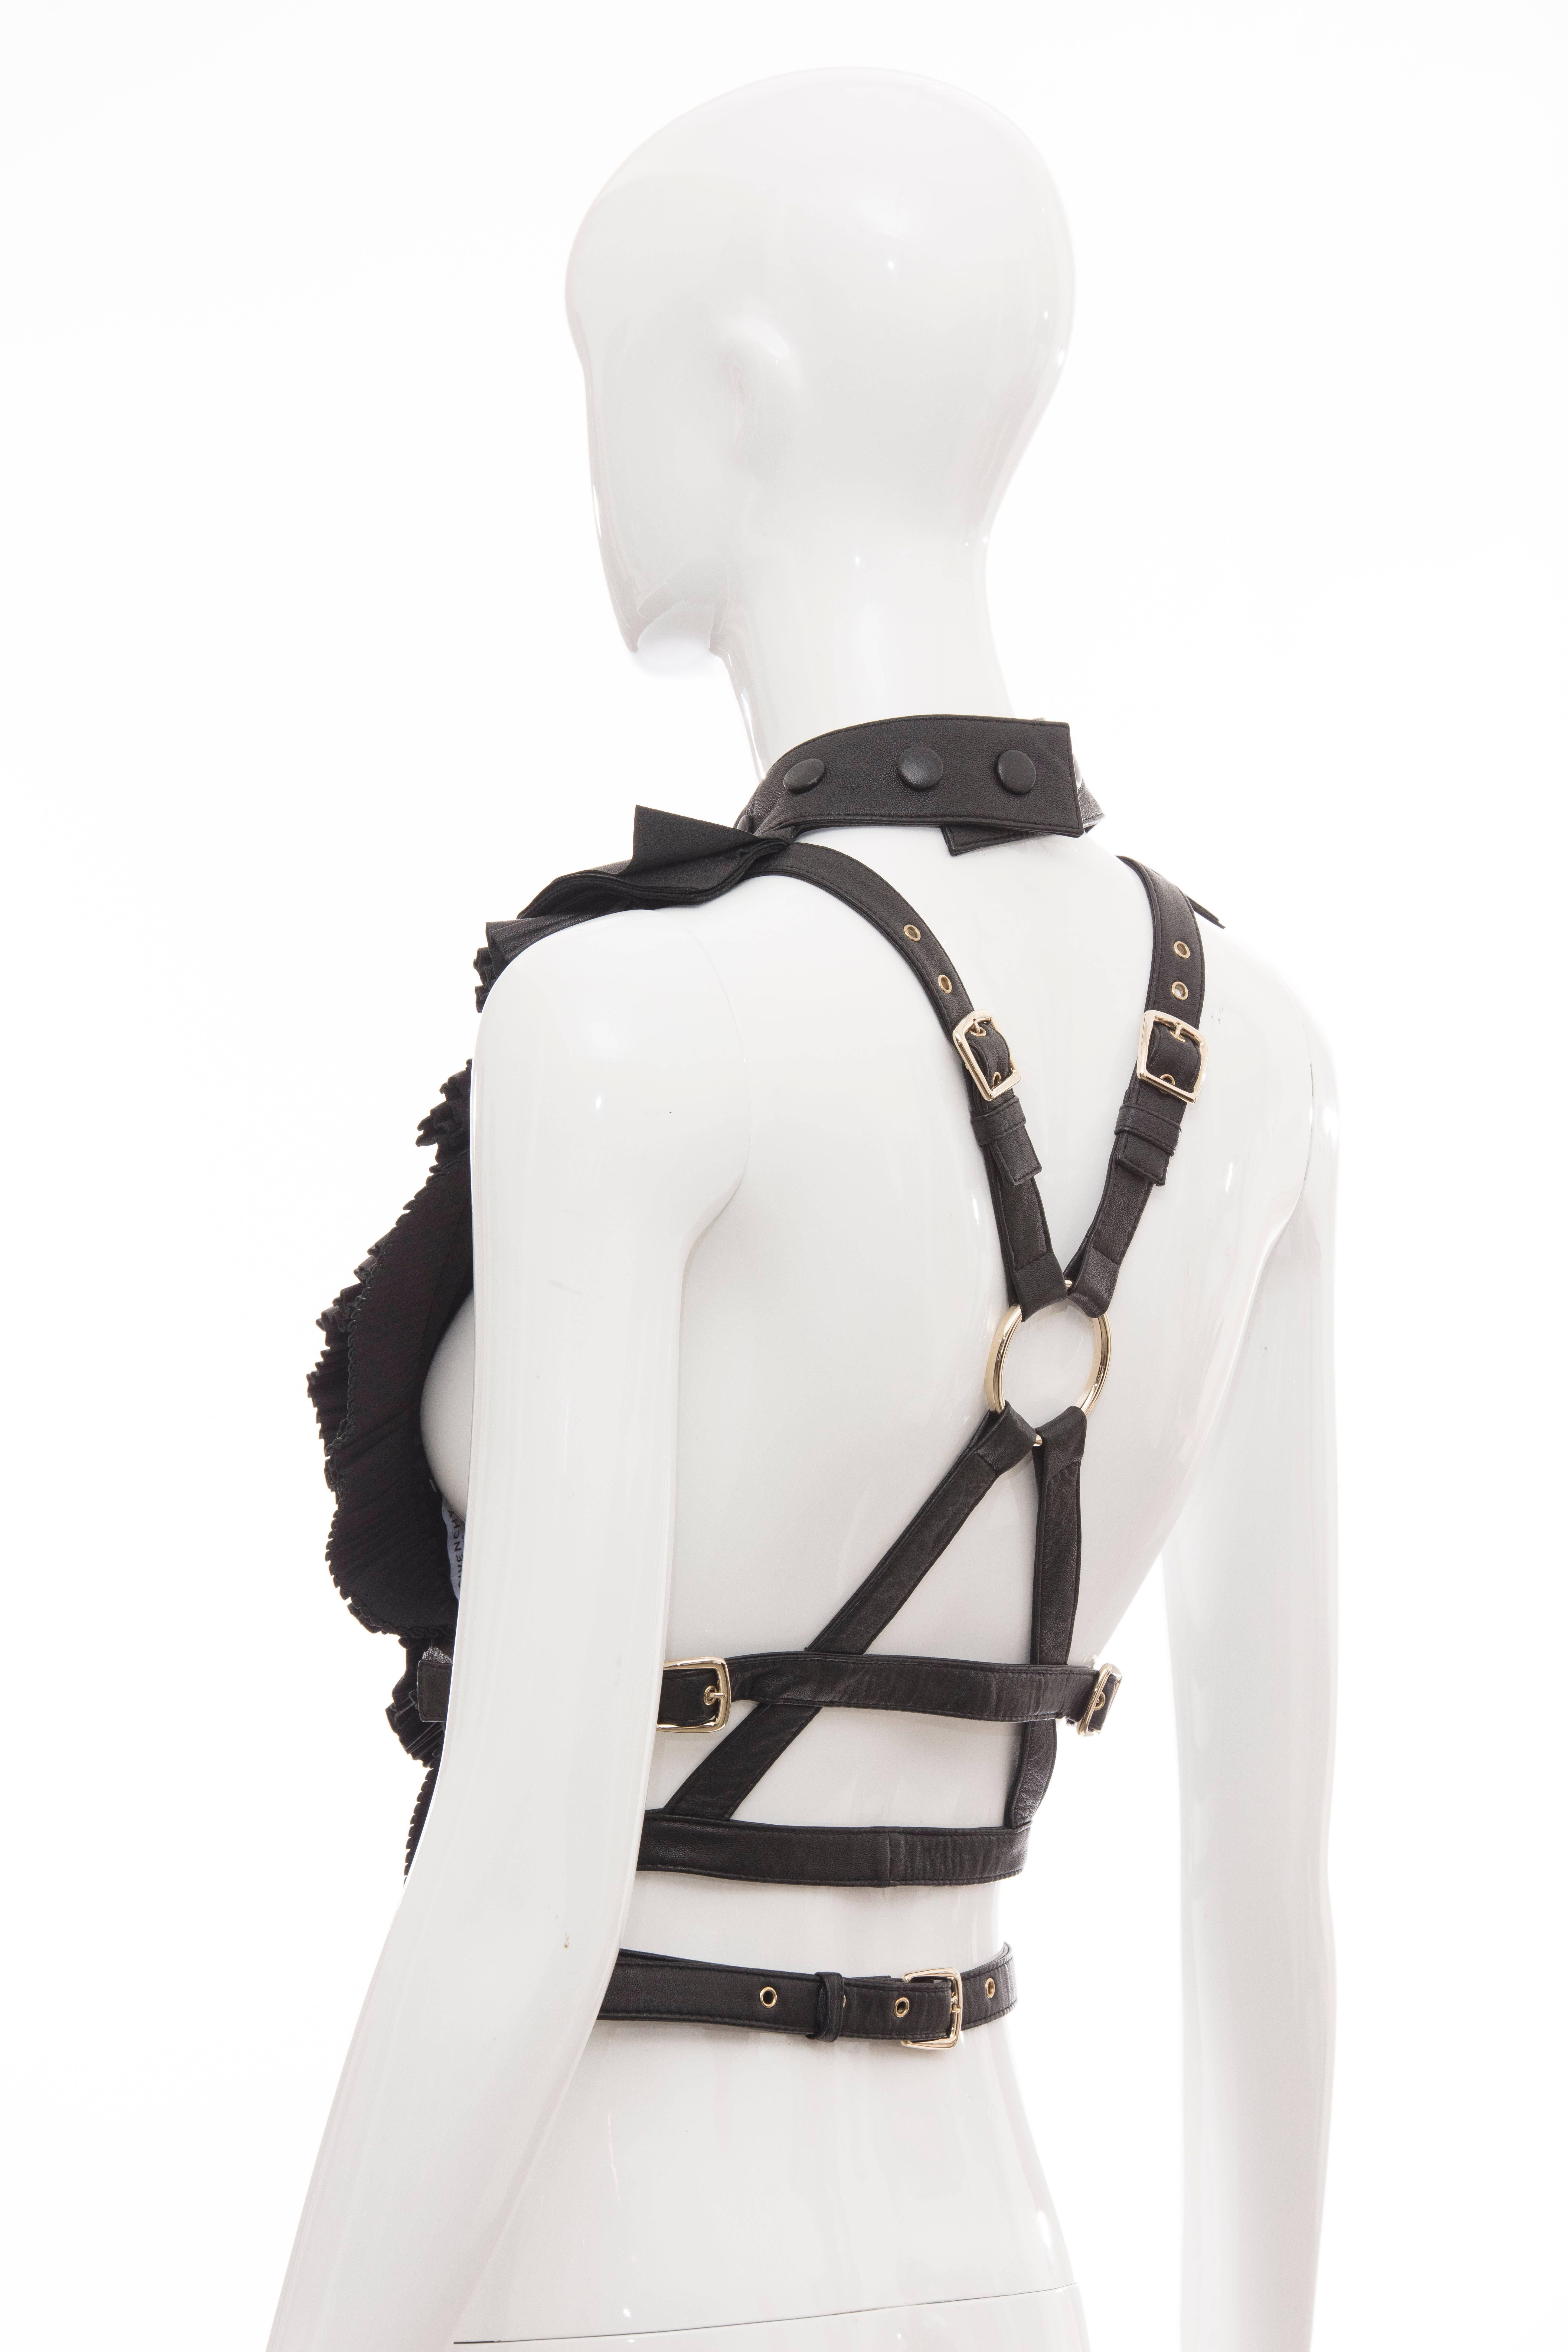 Women's Givenchy by Riccardo Tisci Runway Black Leather Ruffled Harness Top, Spring 2011